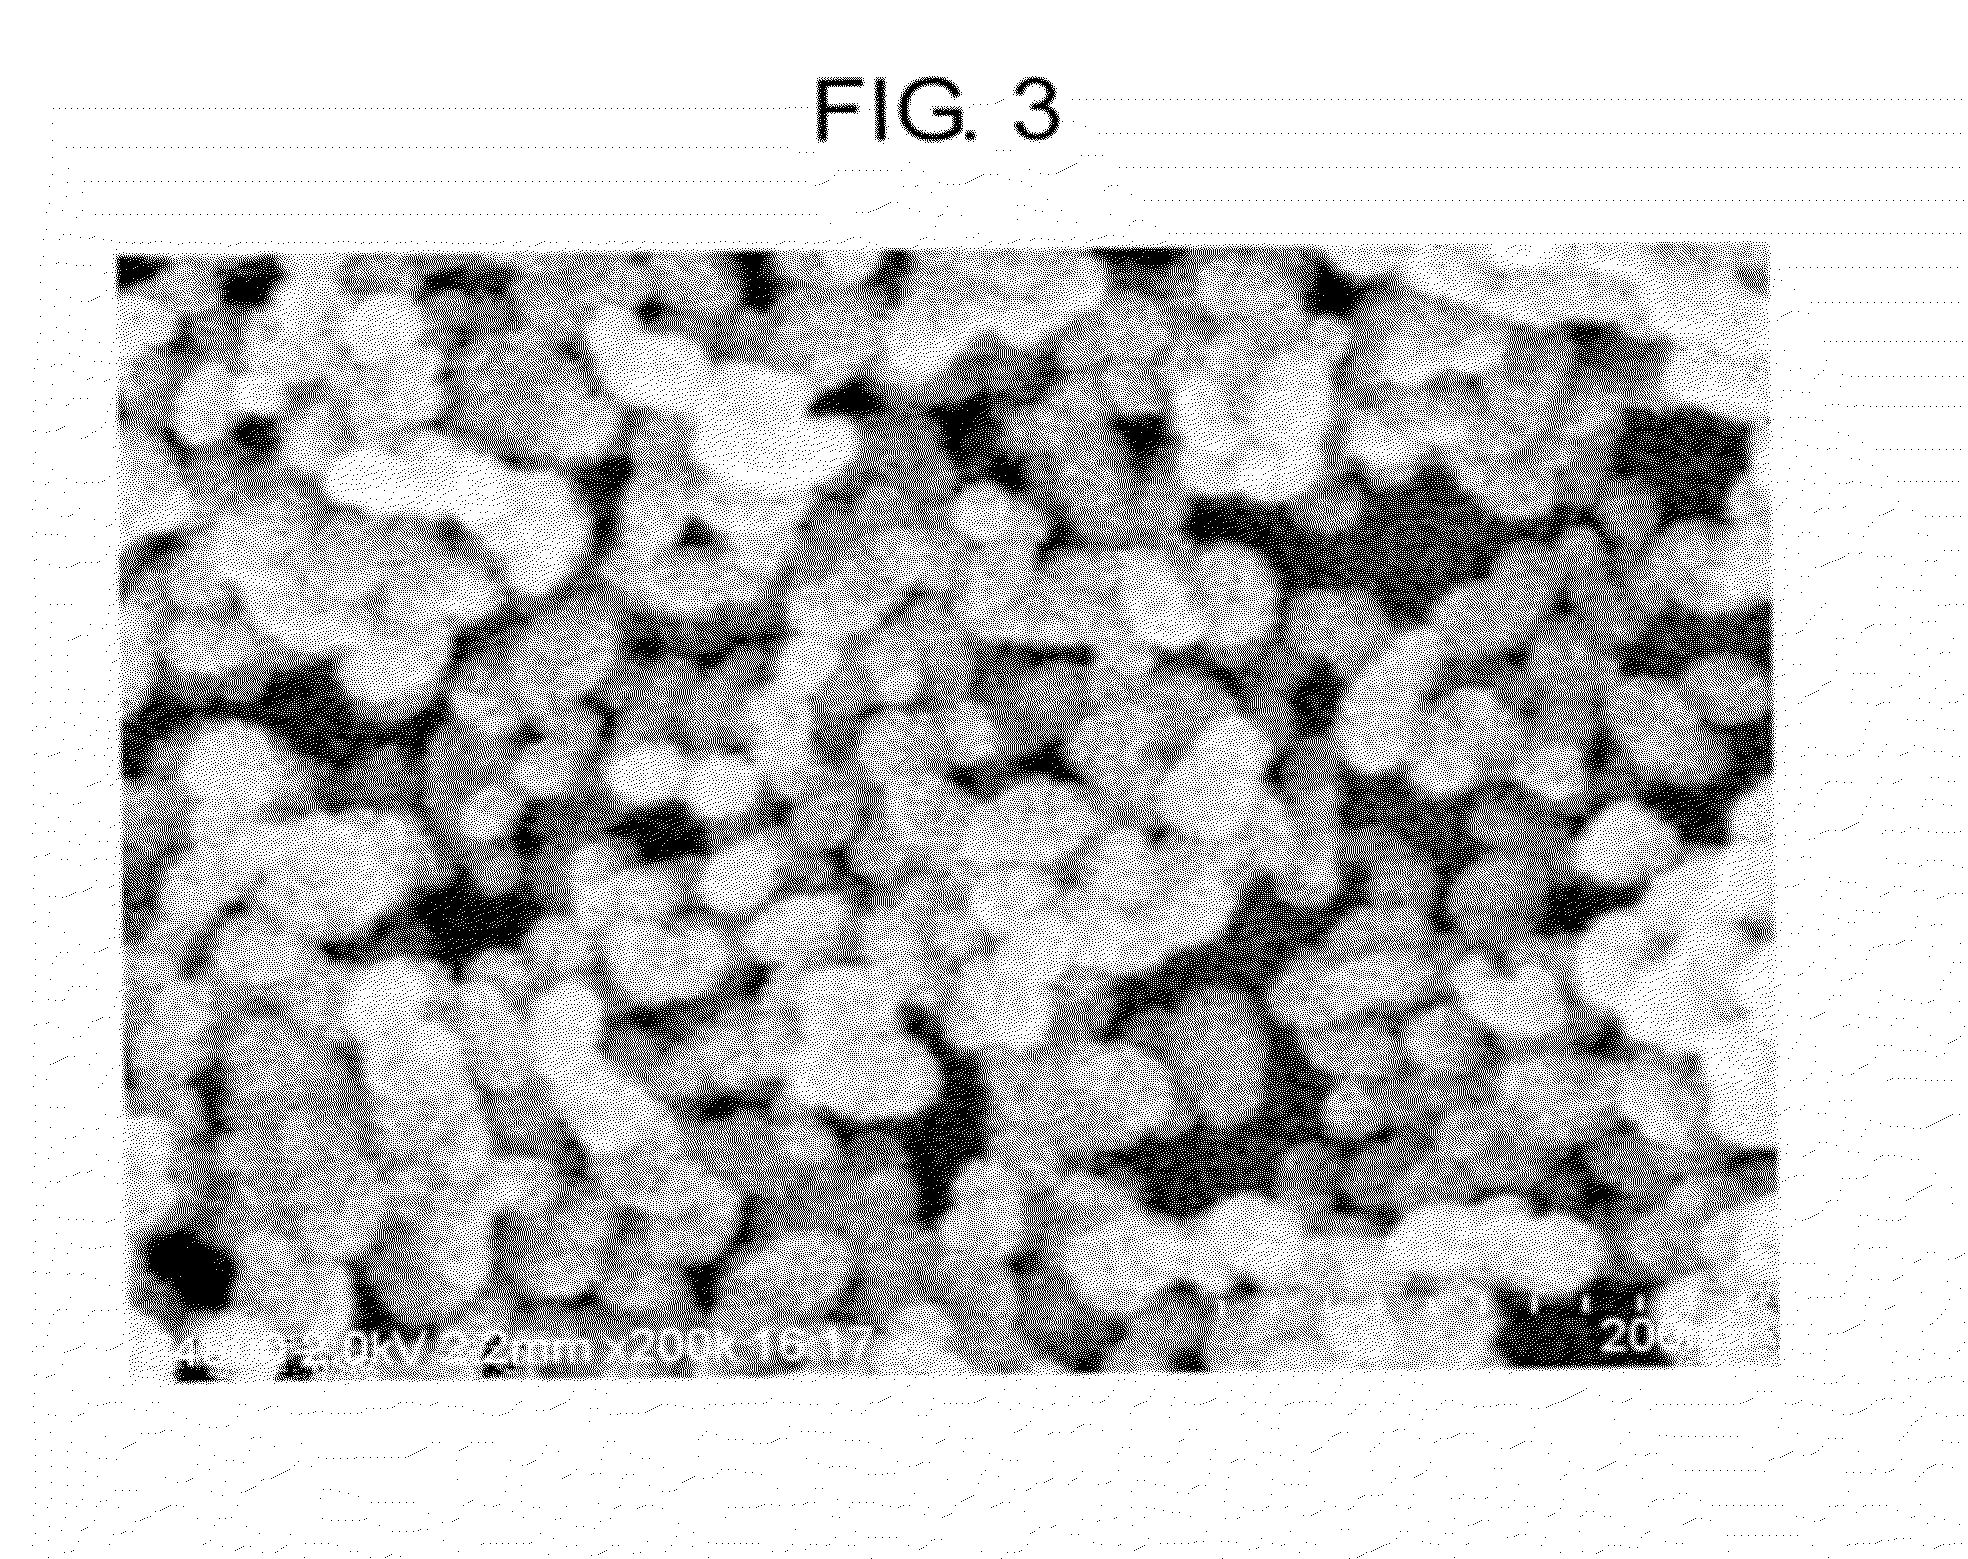 Strontium carbonate micropowder and process for production